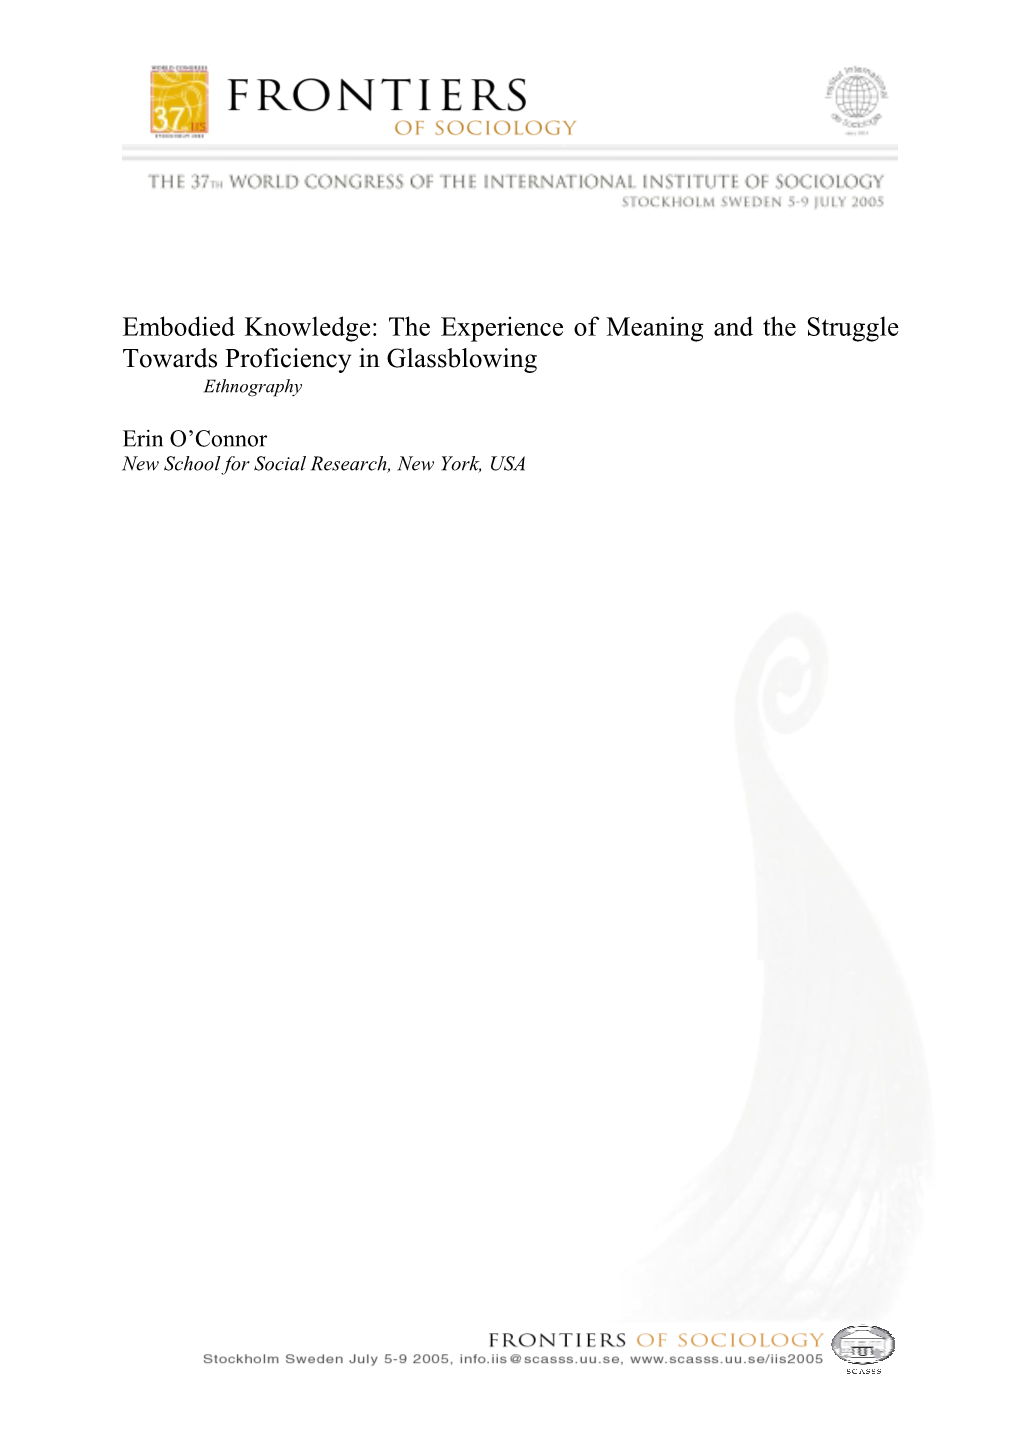 The Experience of Meaning and the Struggle Towards Proficiency in Glassblowing  Ethnography